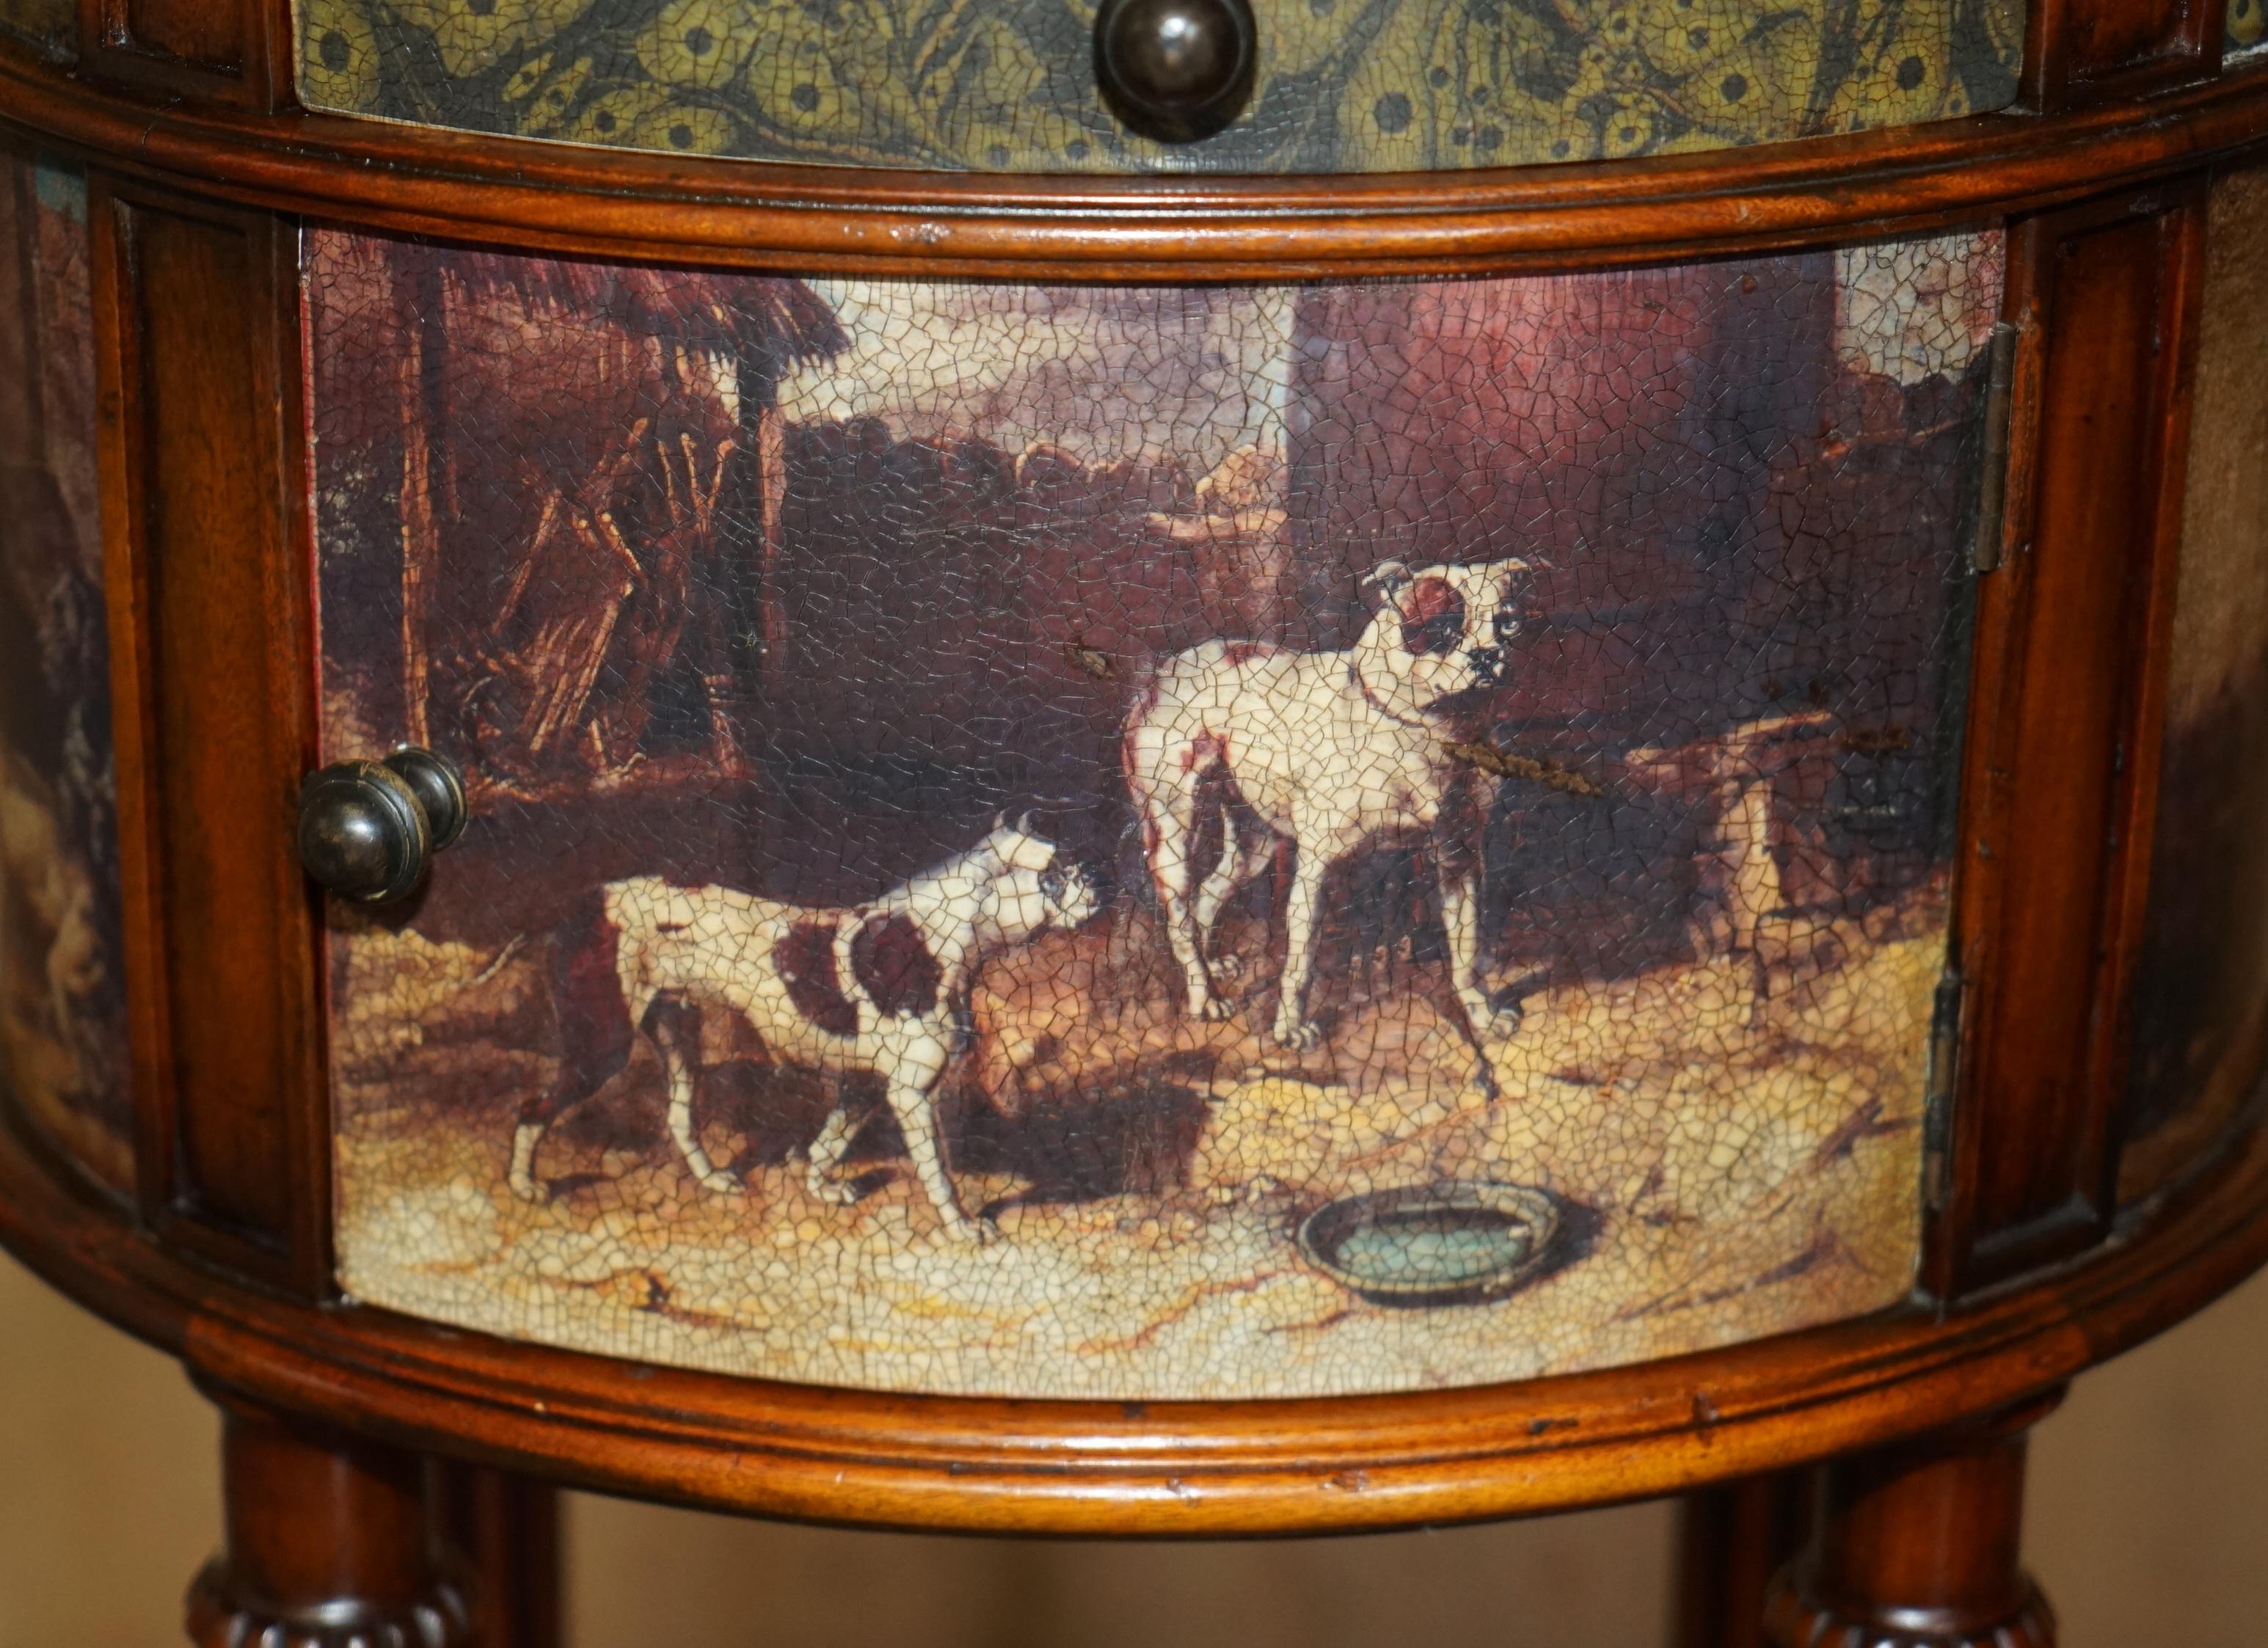 Leather EXQUISITE TWO TIER TALL SiDE TABLE CABINET LEATHER CLADDED & PAINTED WITH DOGS For Sale